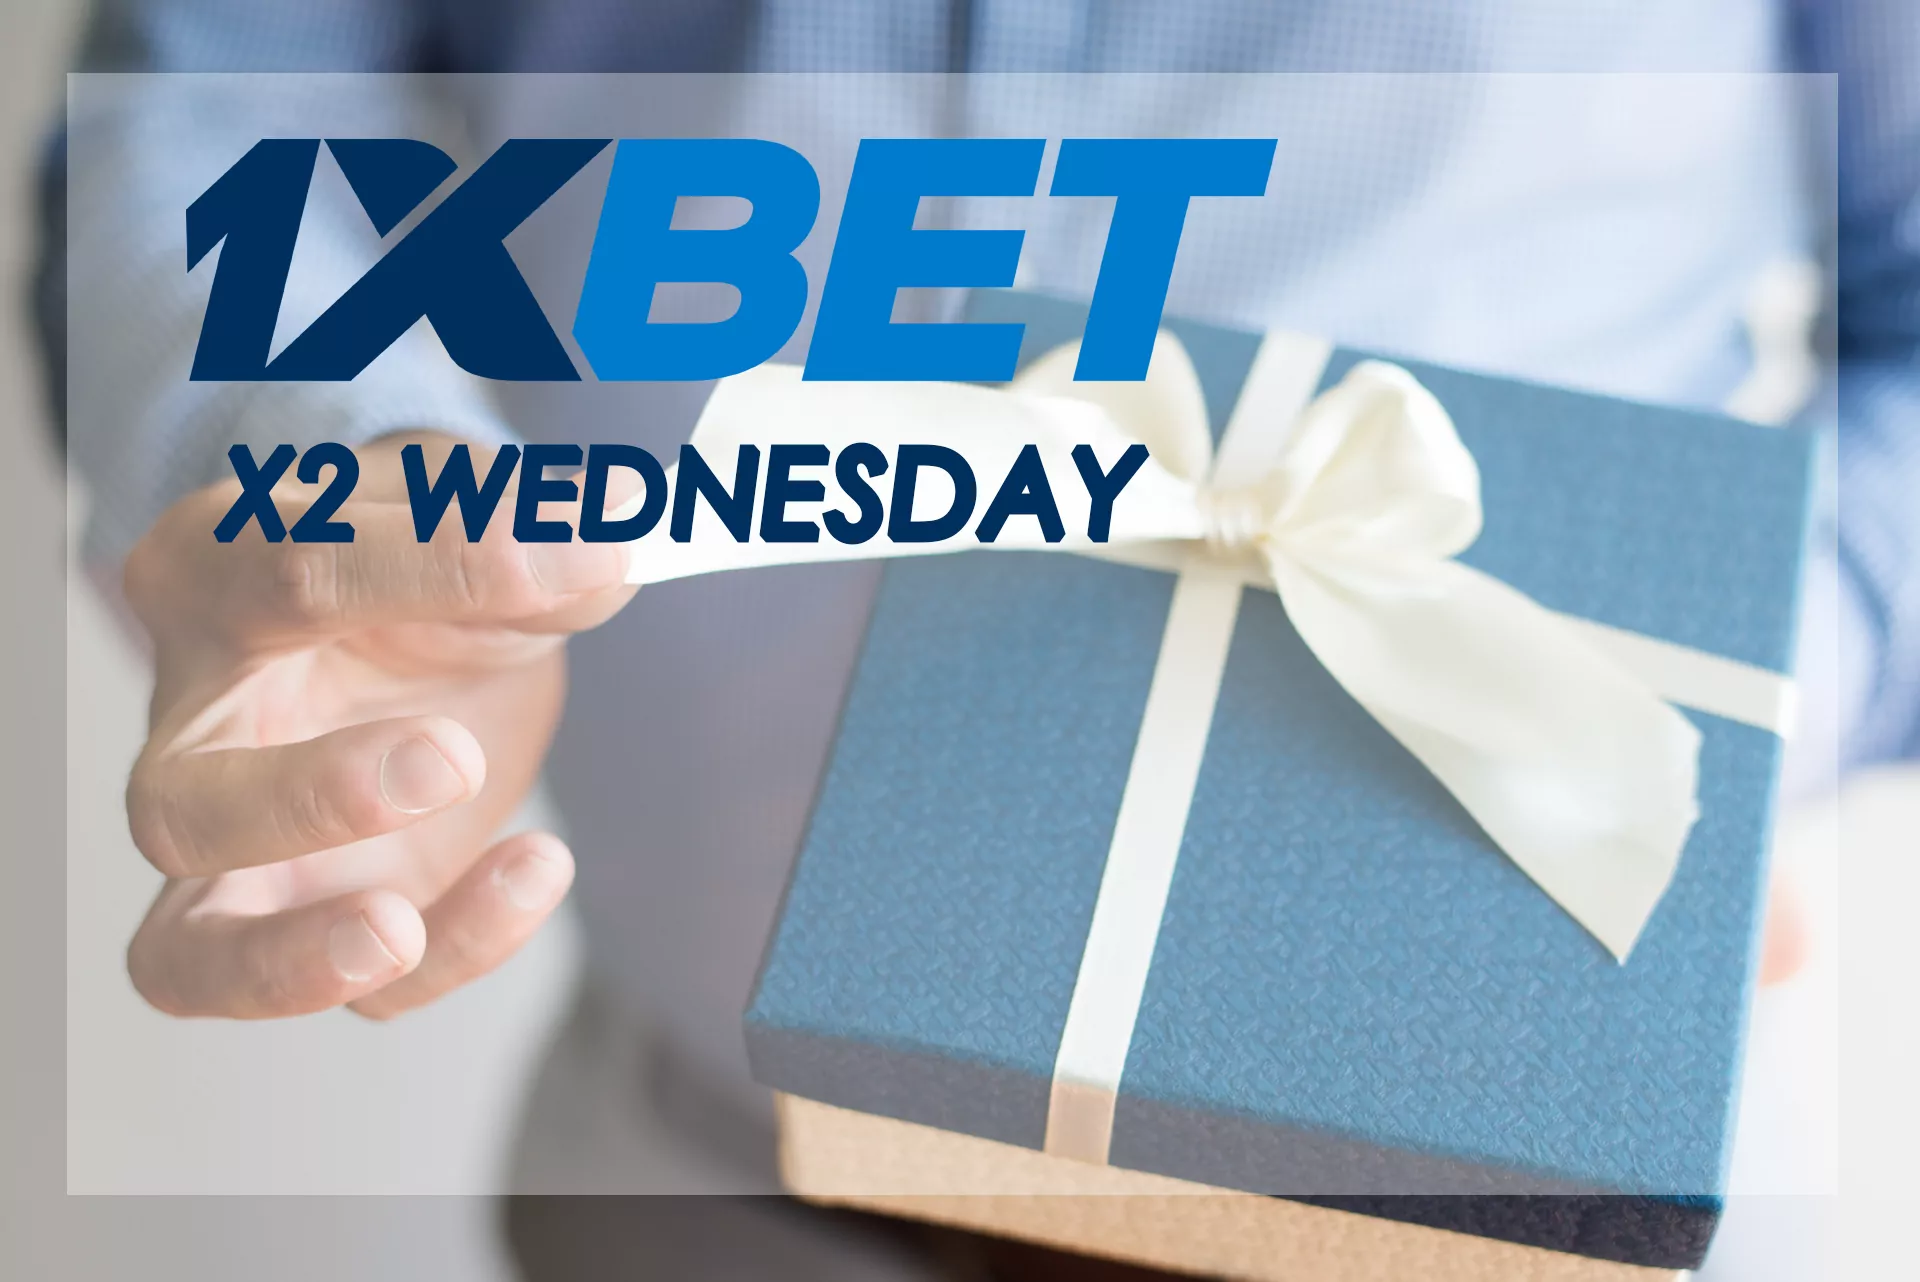 Every Wednesday, 1xBet users get an INR 9,000 bonus when making a deposit.